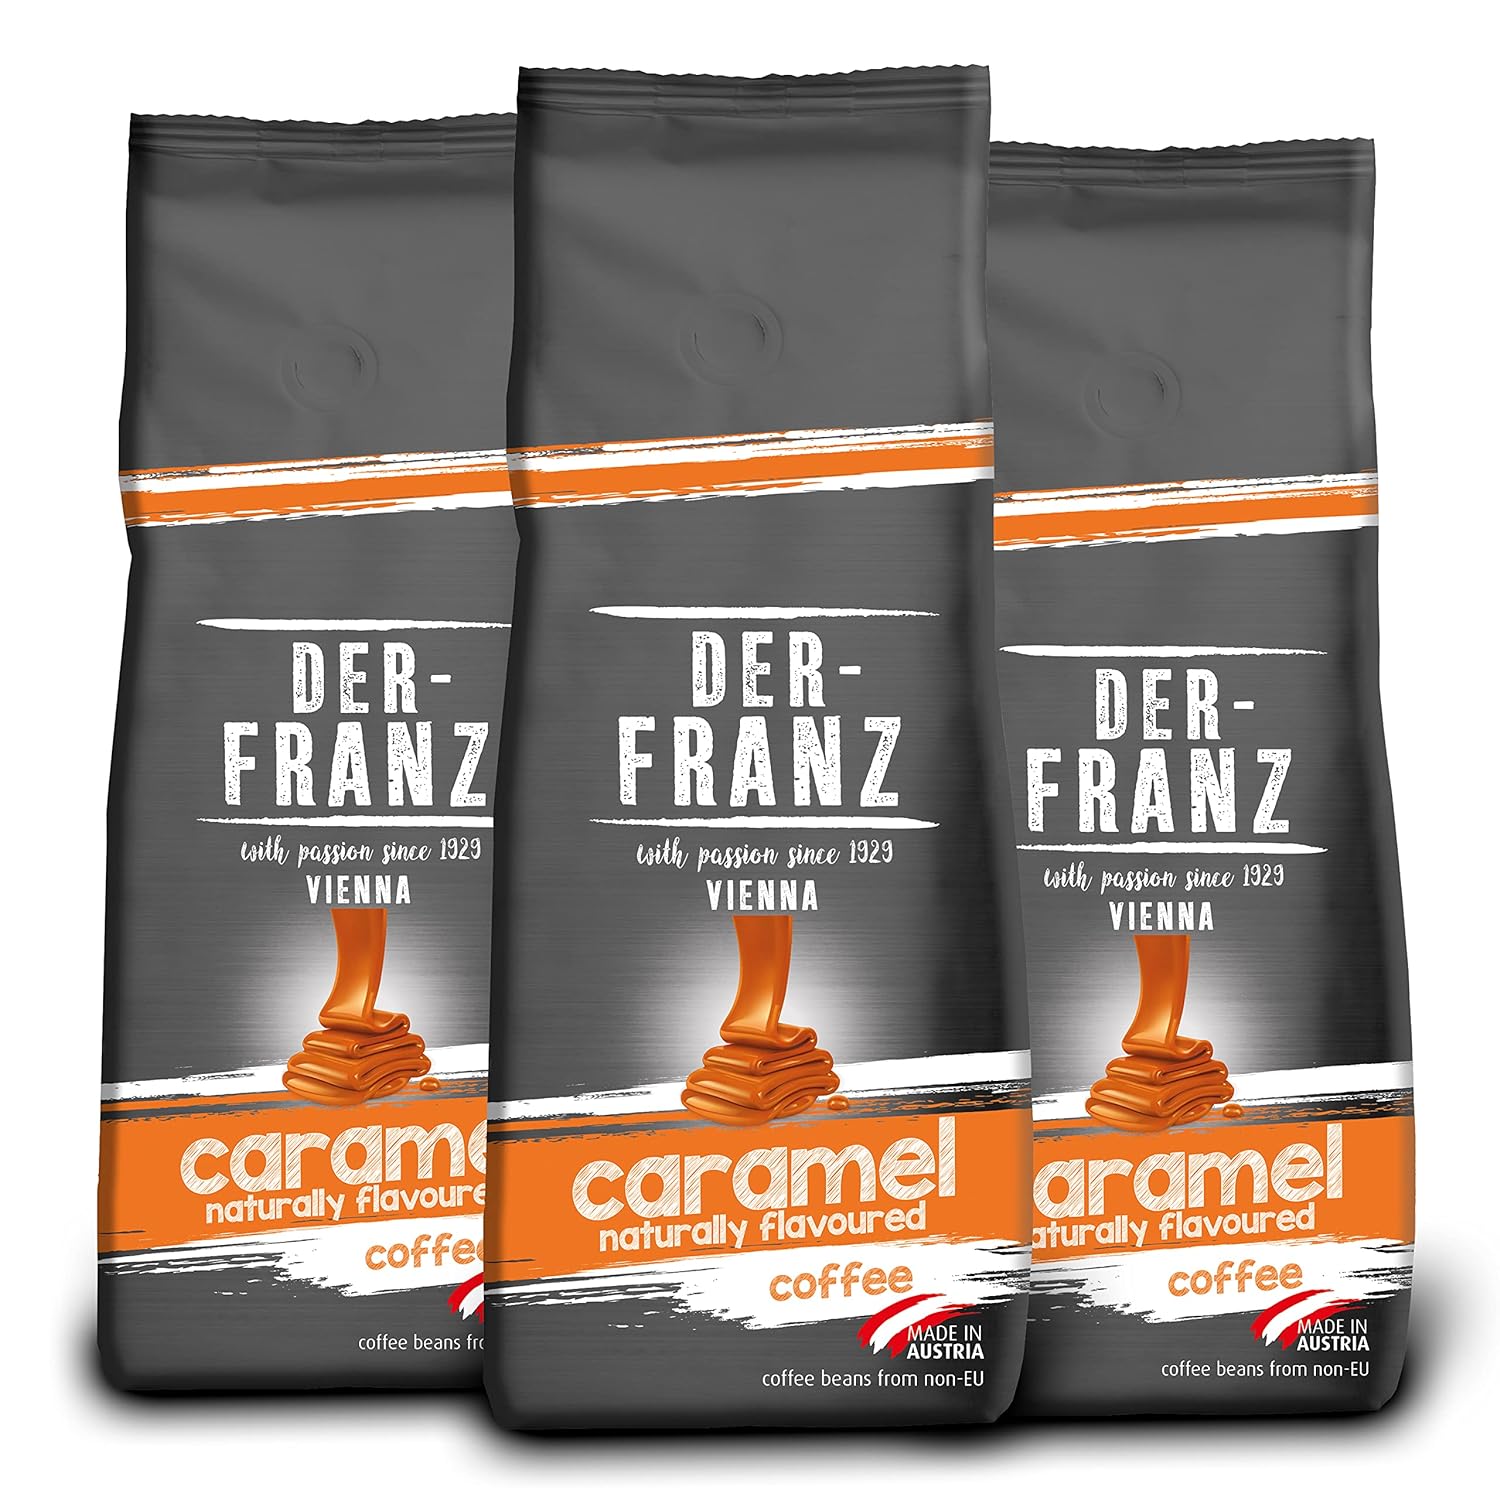 Der-Franz Coffee, Flavored with Caramel, Arabica and Robusta Coffee Beans, 3 x 500 g